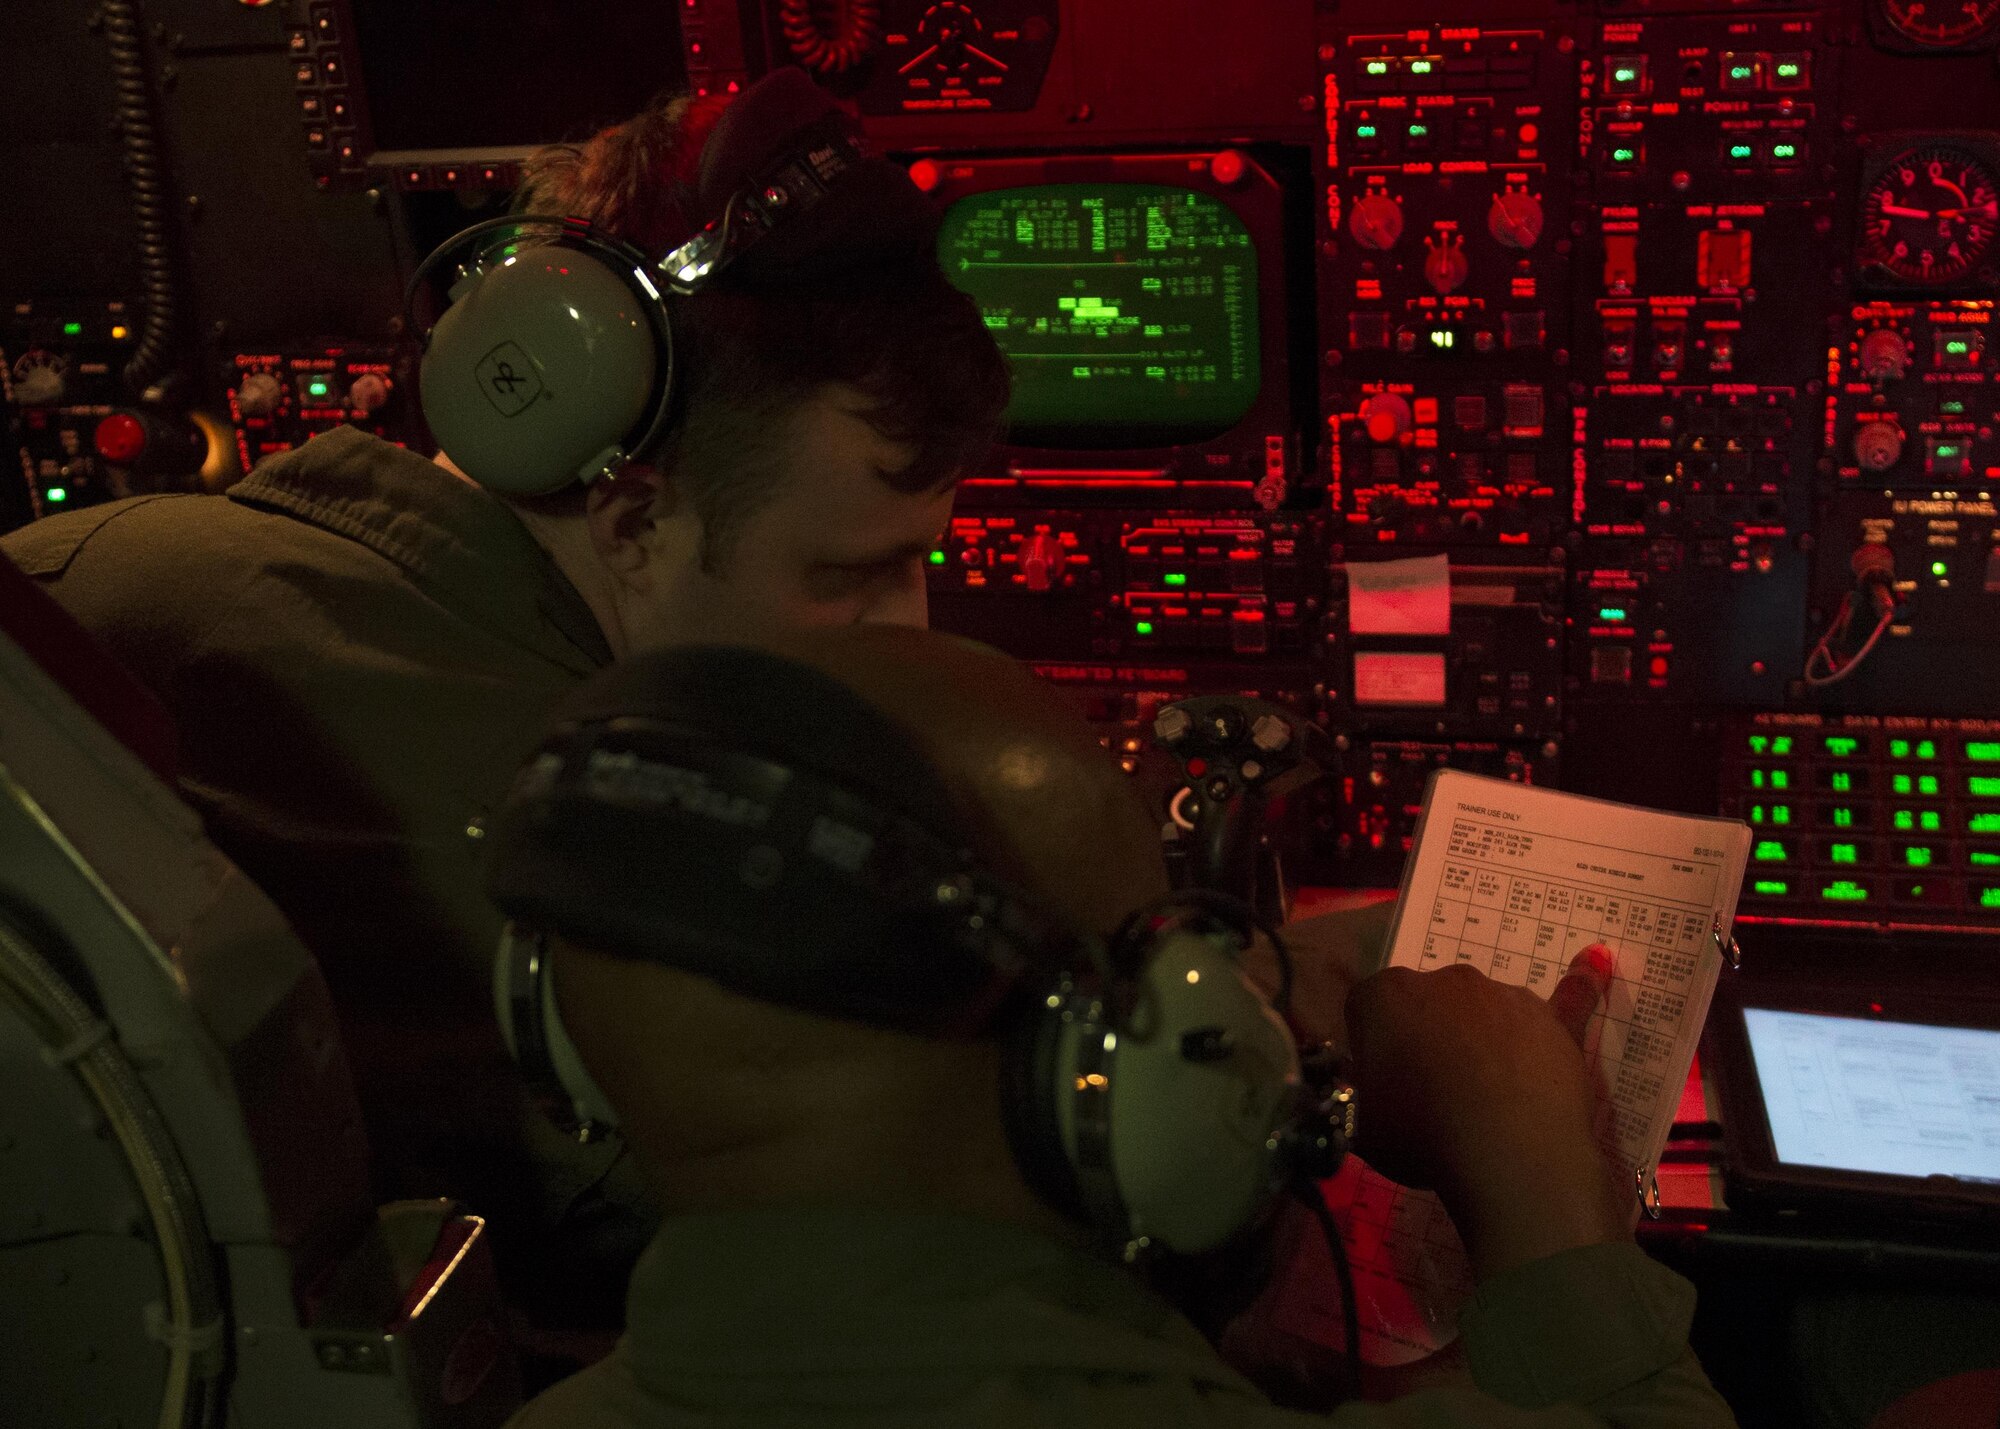 Capt. Dino Johnson, 69th Bomb Squadron weapons system officer instructor, trains 1st Lt. Wade Waldmann, 69th BS weapons systems officer, on the controls of a B-52H Stratofortress during a simulated flight in the B-52 navigator simulator at Minot Air Force Base, N.D., March 8, 2017. The navigator simulator is located next to the B-52 weapons system trainer and allows aircrews to prepare for real world flight, emergencies and combat. (U.S. Air Force photo/Airman 1st Class Alyssa M. Akers)